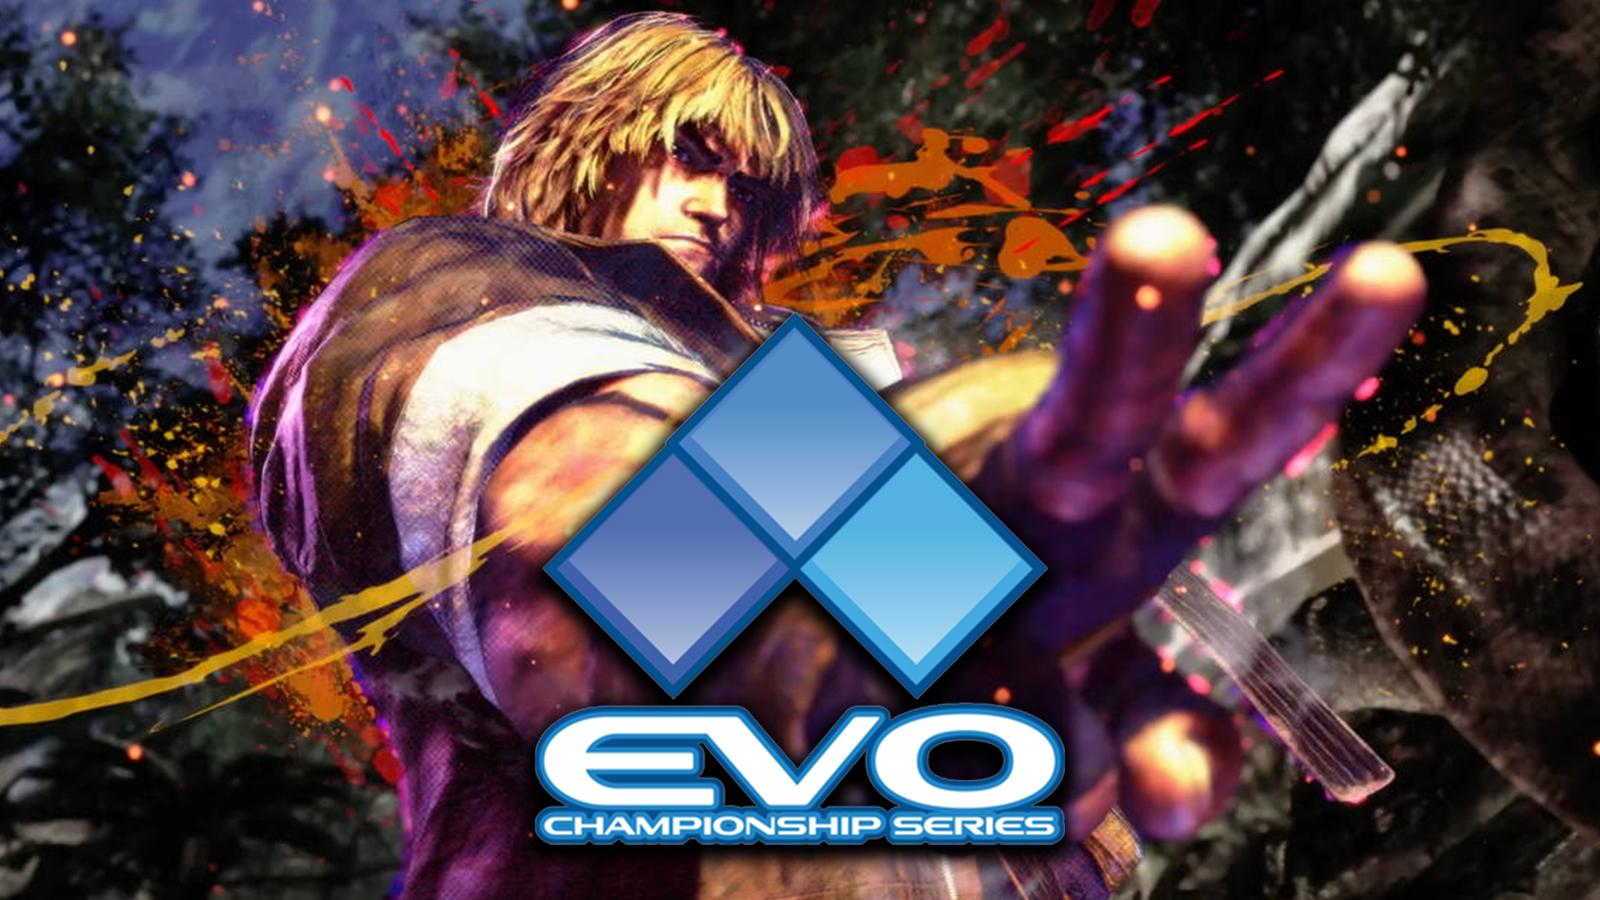 Select Fighting Games Free on Steam for EVO Weekend!